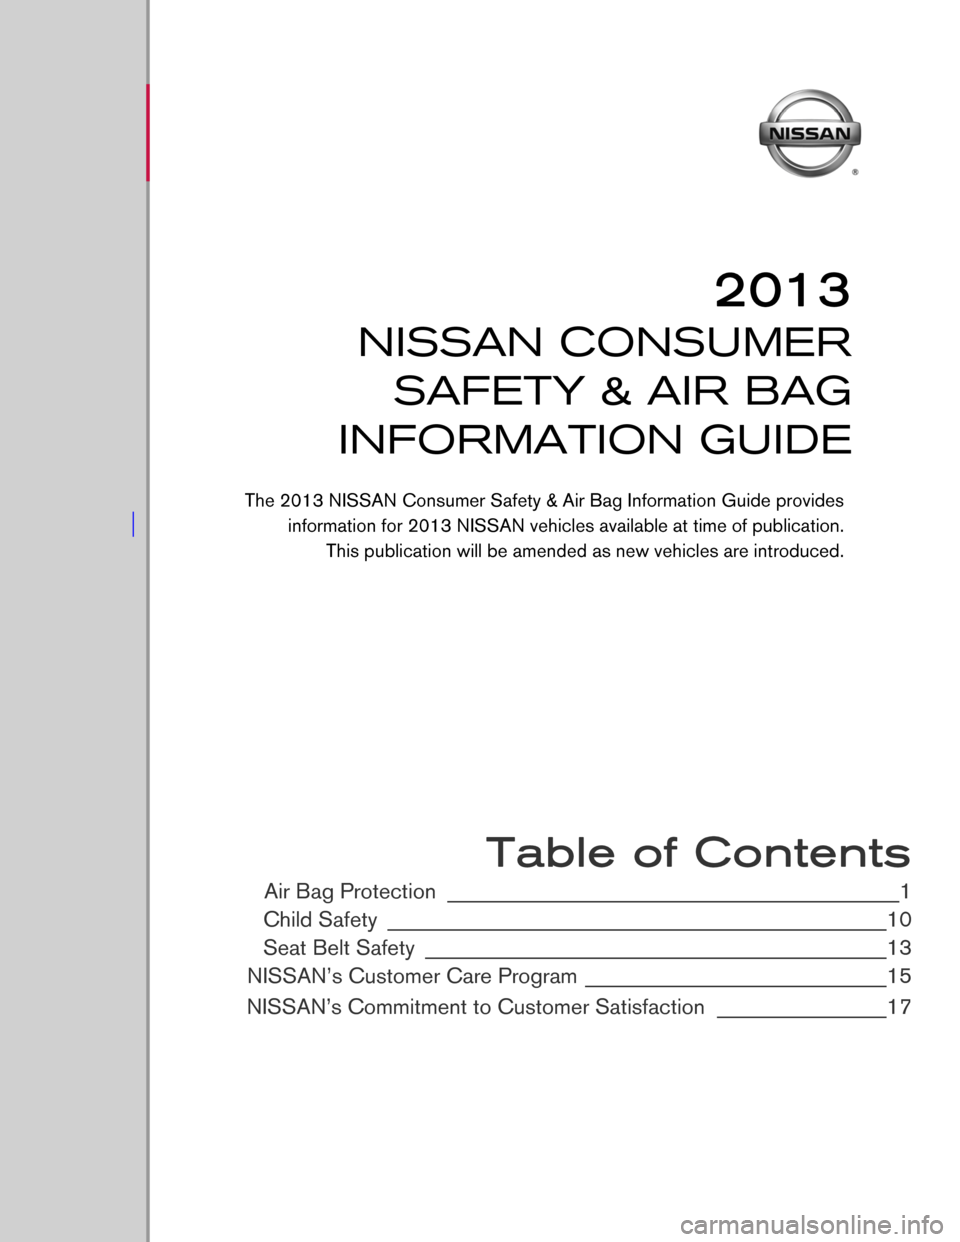 NISSAN CUBE 2013 3.G Consumer Safety Air Bag Information Guide  
 
 
 
 
 
 
 
 
 
 
 
 
 
 
 
 
 
 
 
 
 
 
 Table of Contents
Air Bag Protection ________________________________________________1
Child Safety
 ____________________________________________________